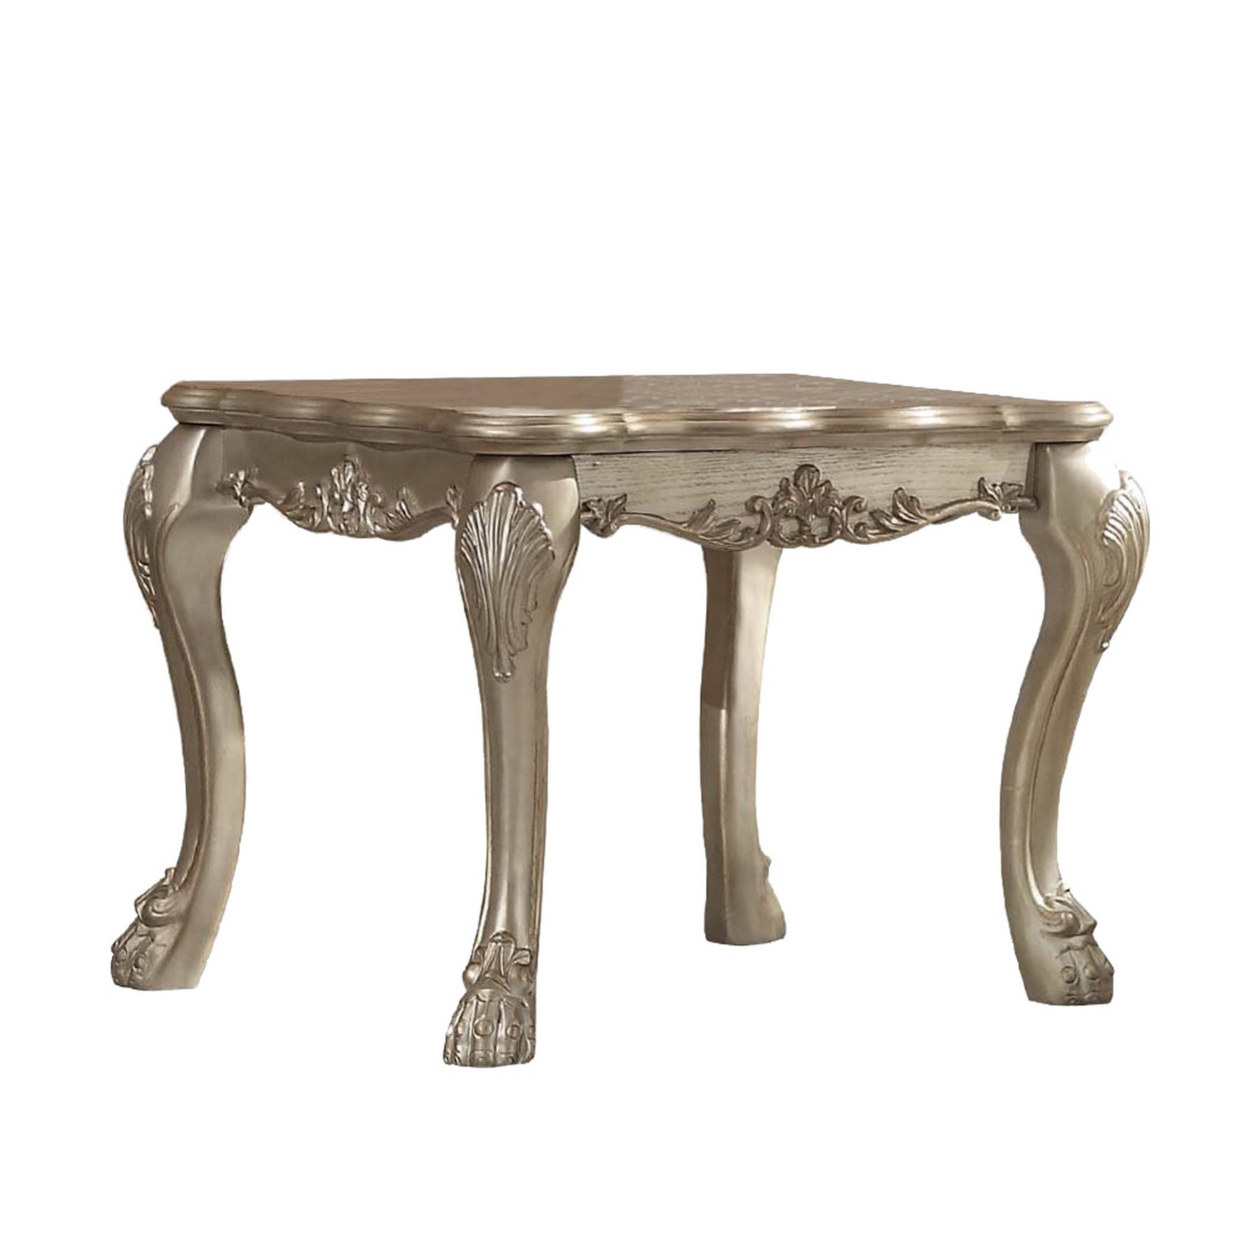 26 Inch Side End Table, Orante Carvings With Claw Legs, Champagne Gold